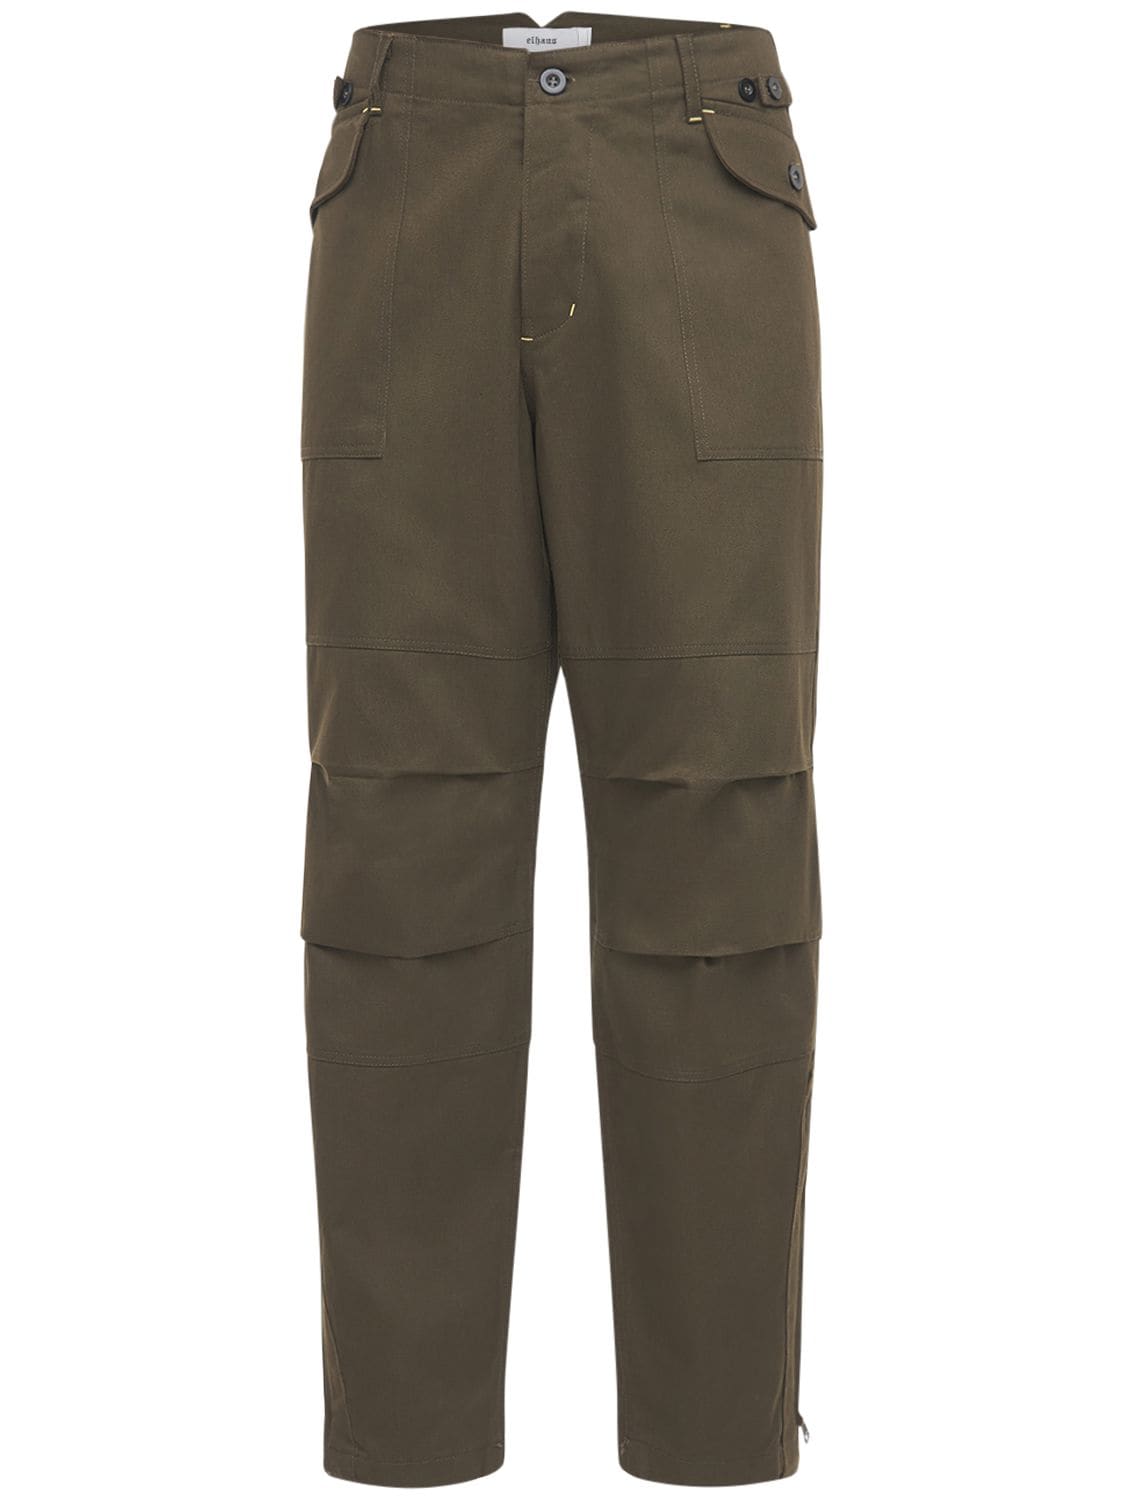 Elhaus Jumper Cotton Twill Pants In Olive Green